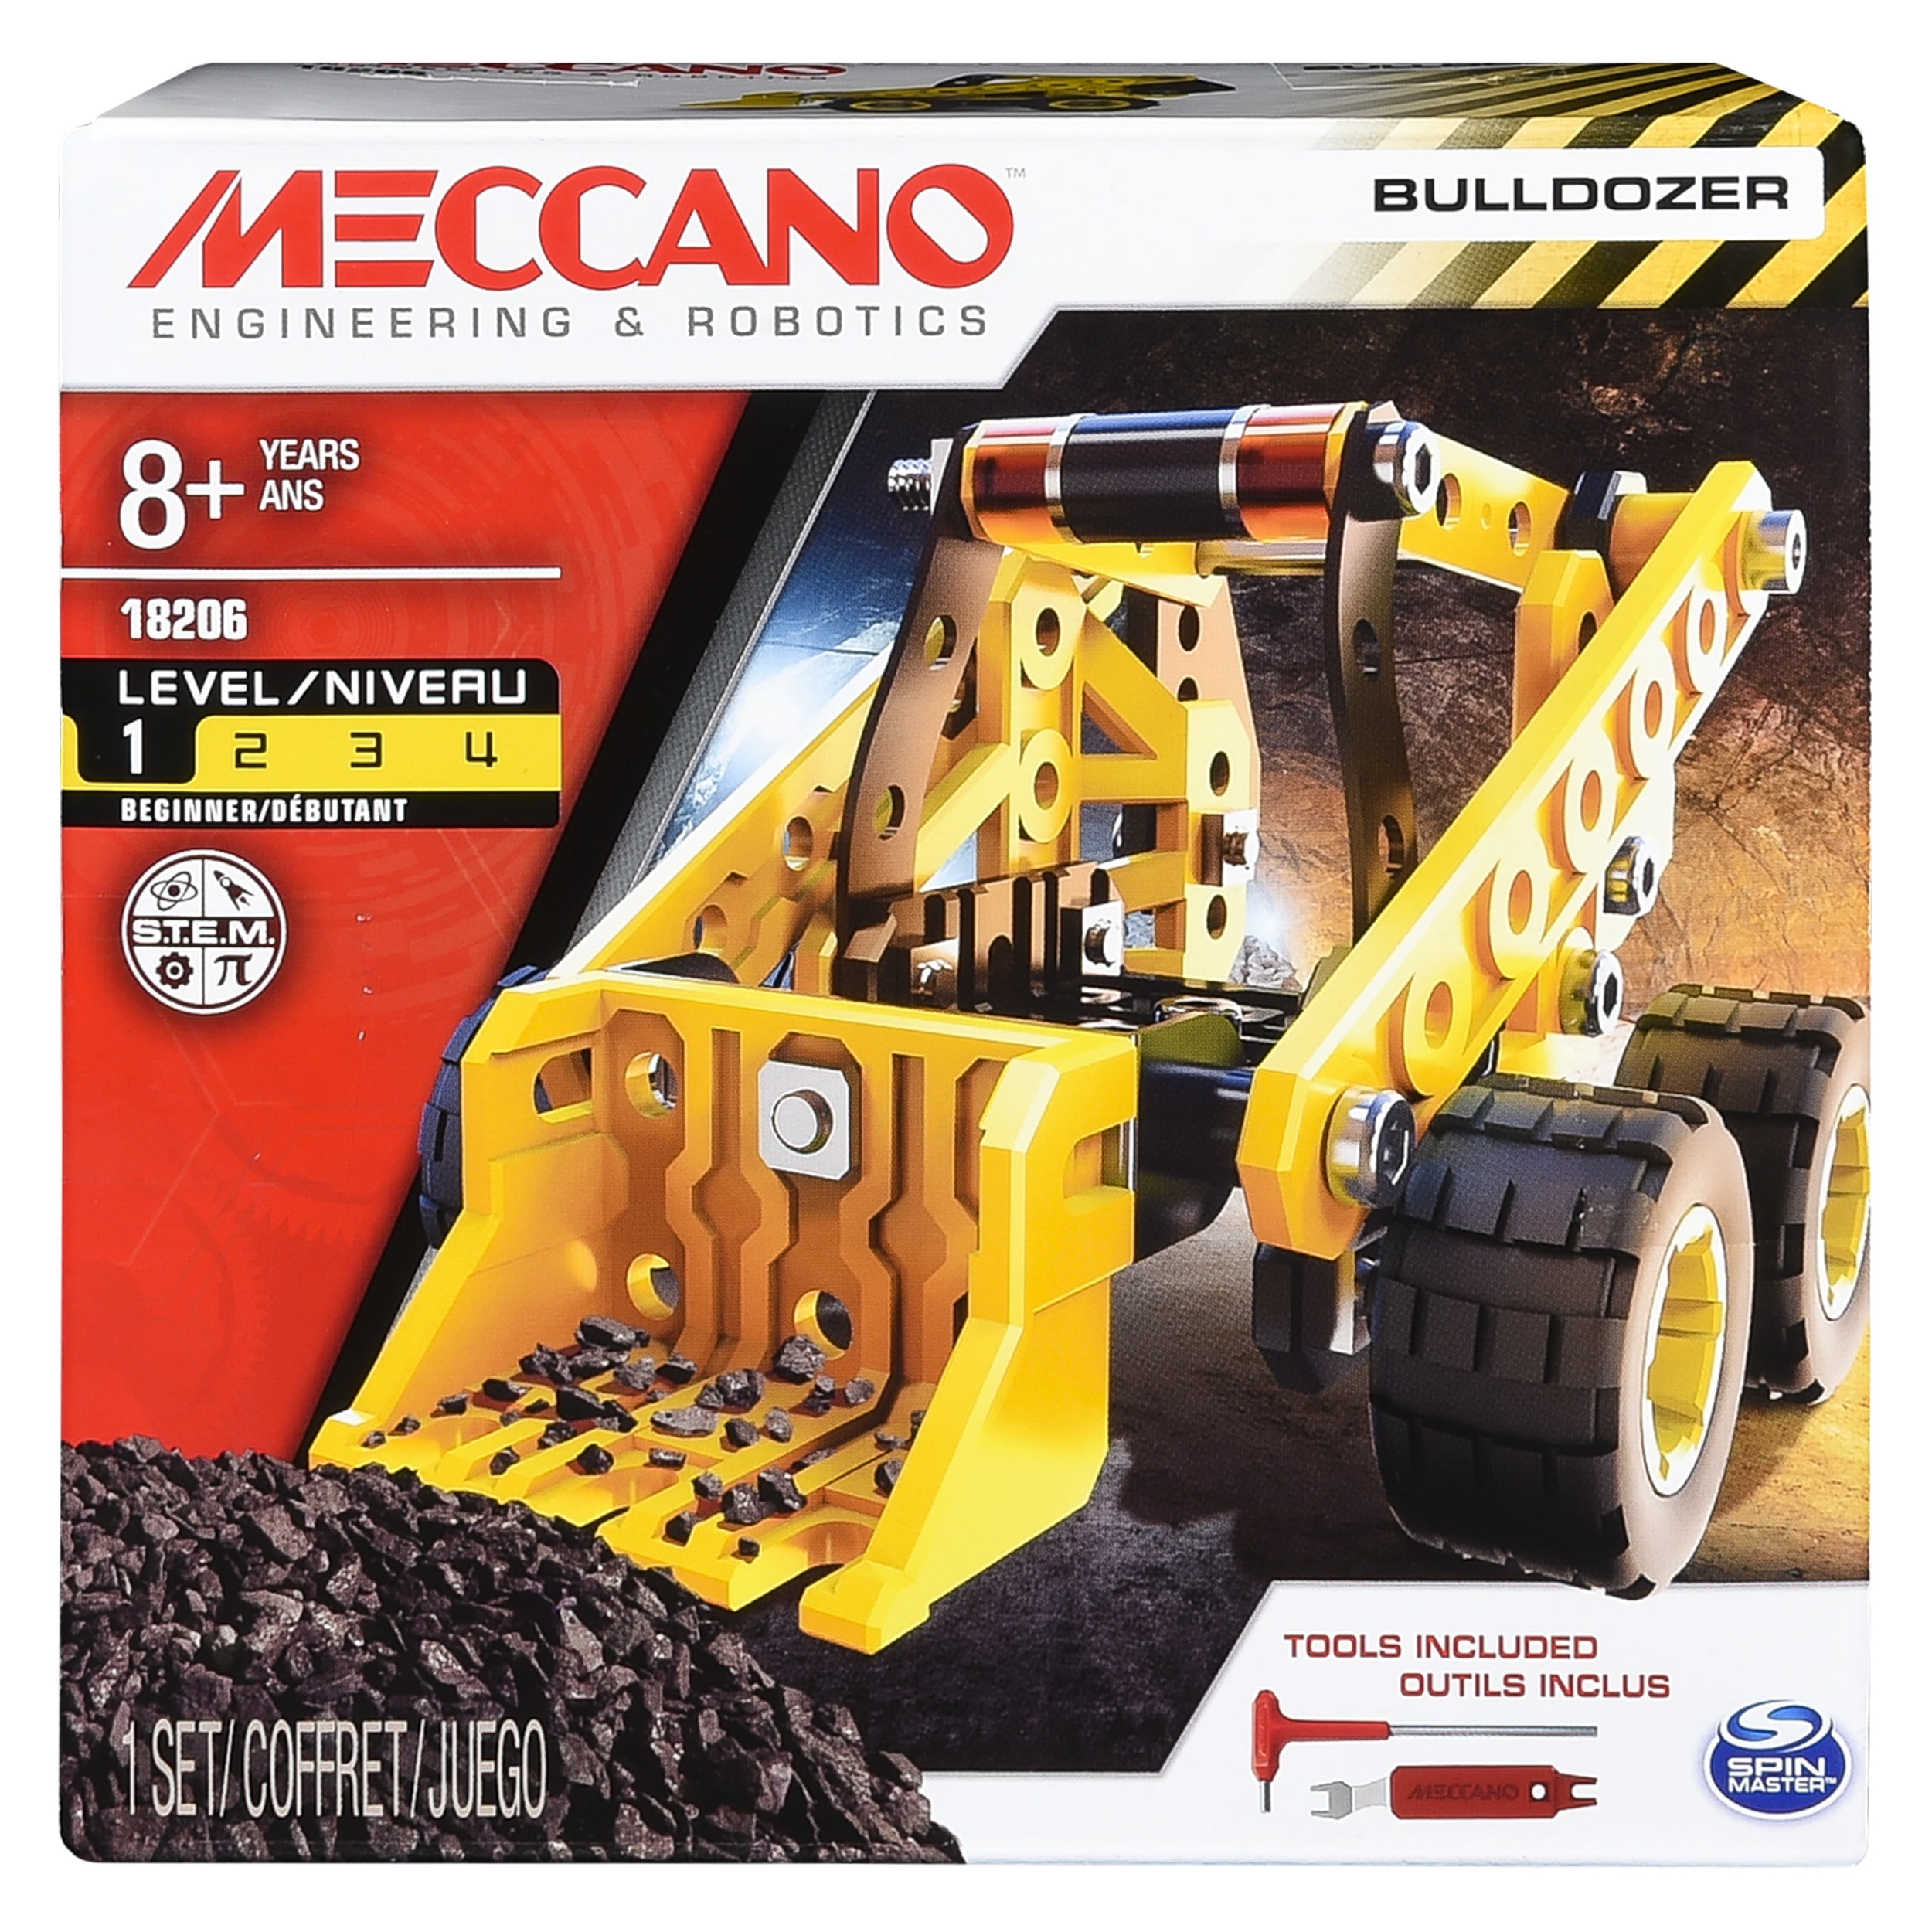 Meccano Erector by SuperCar 25-in-1 STEM Building Kit 328 Parts 